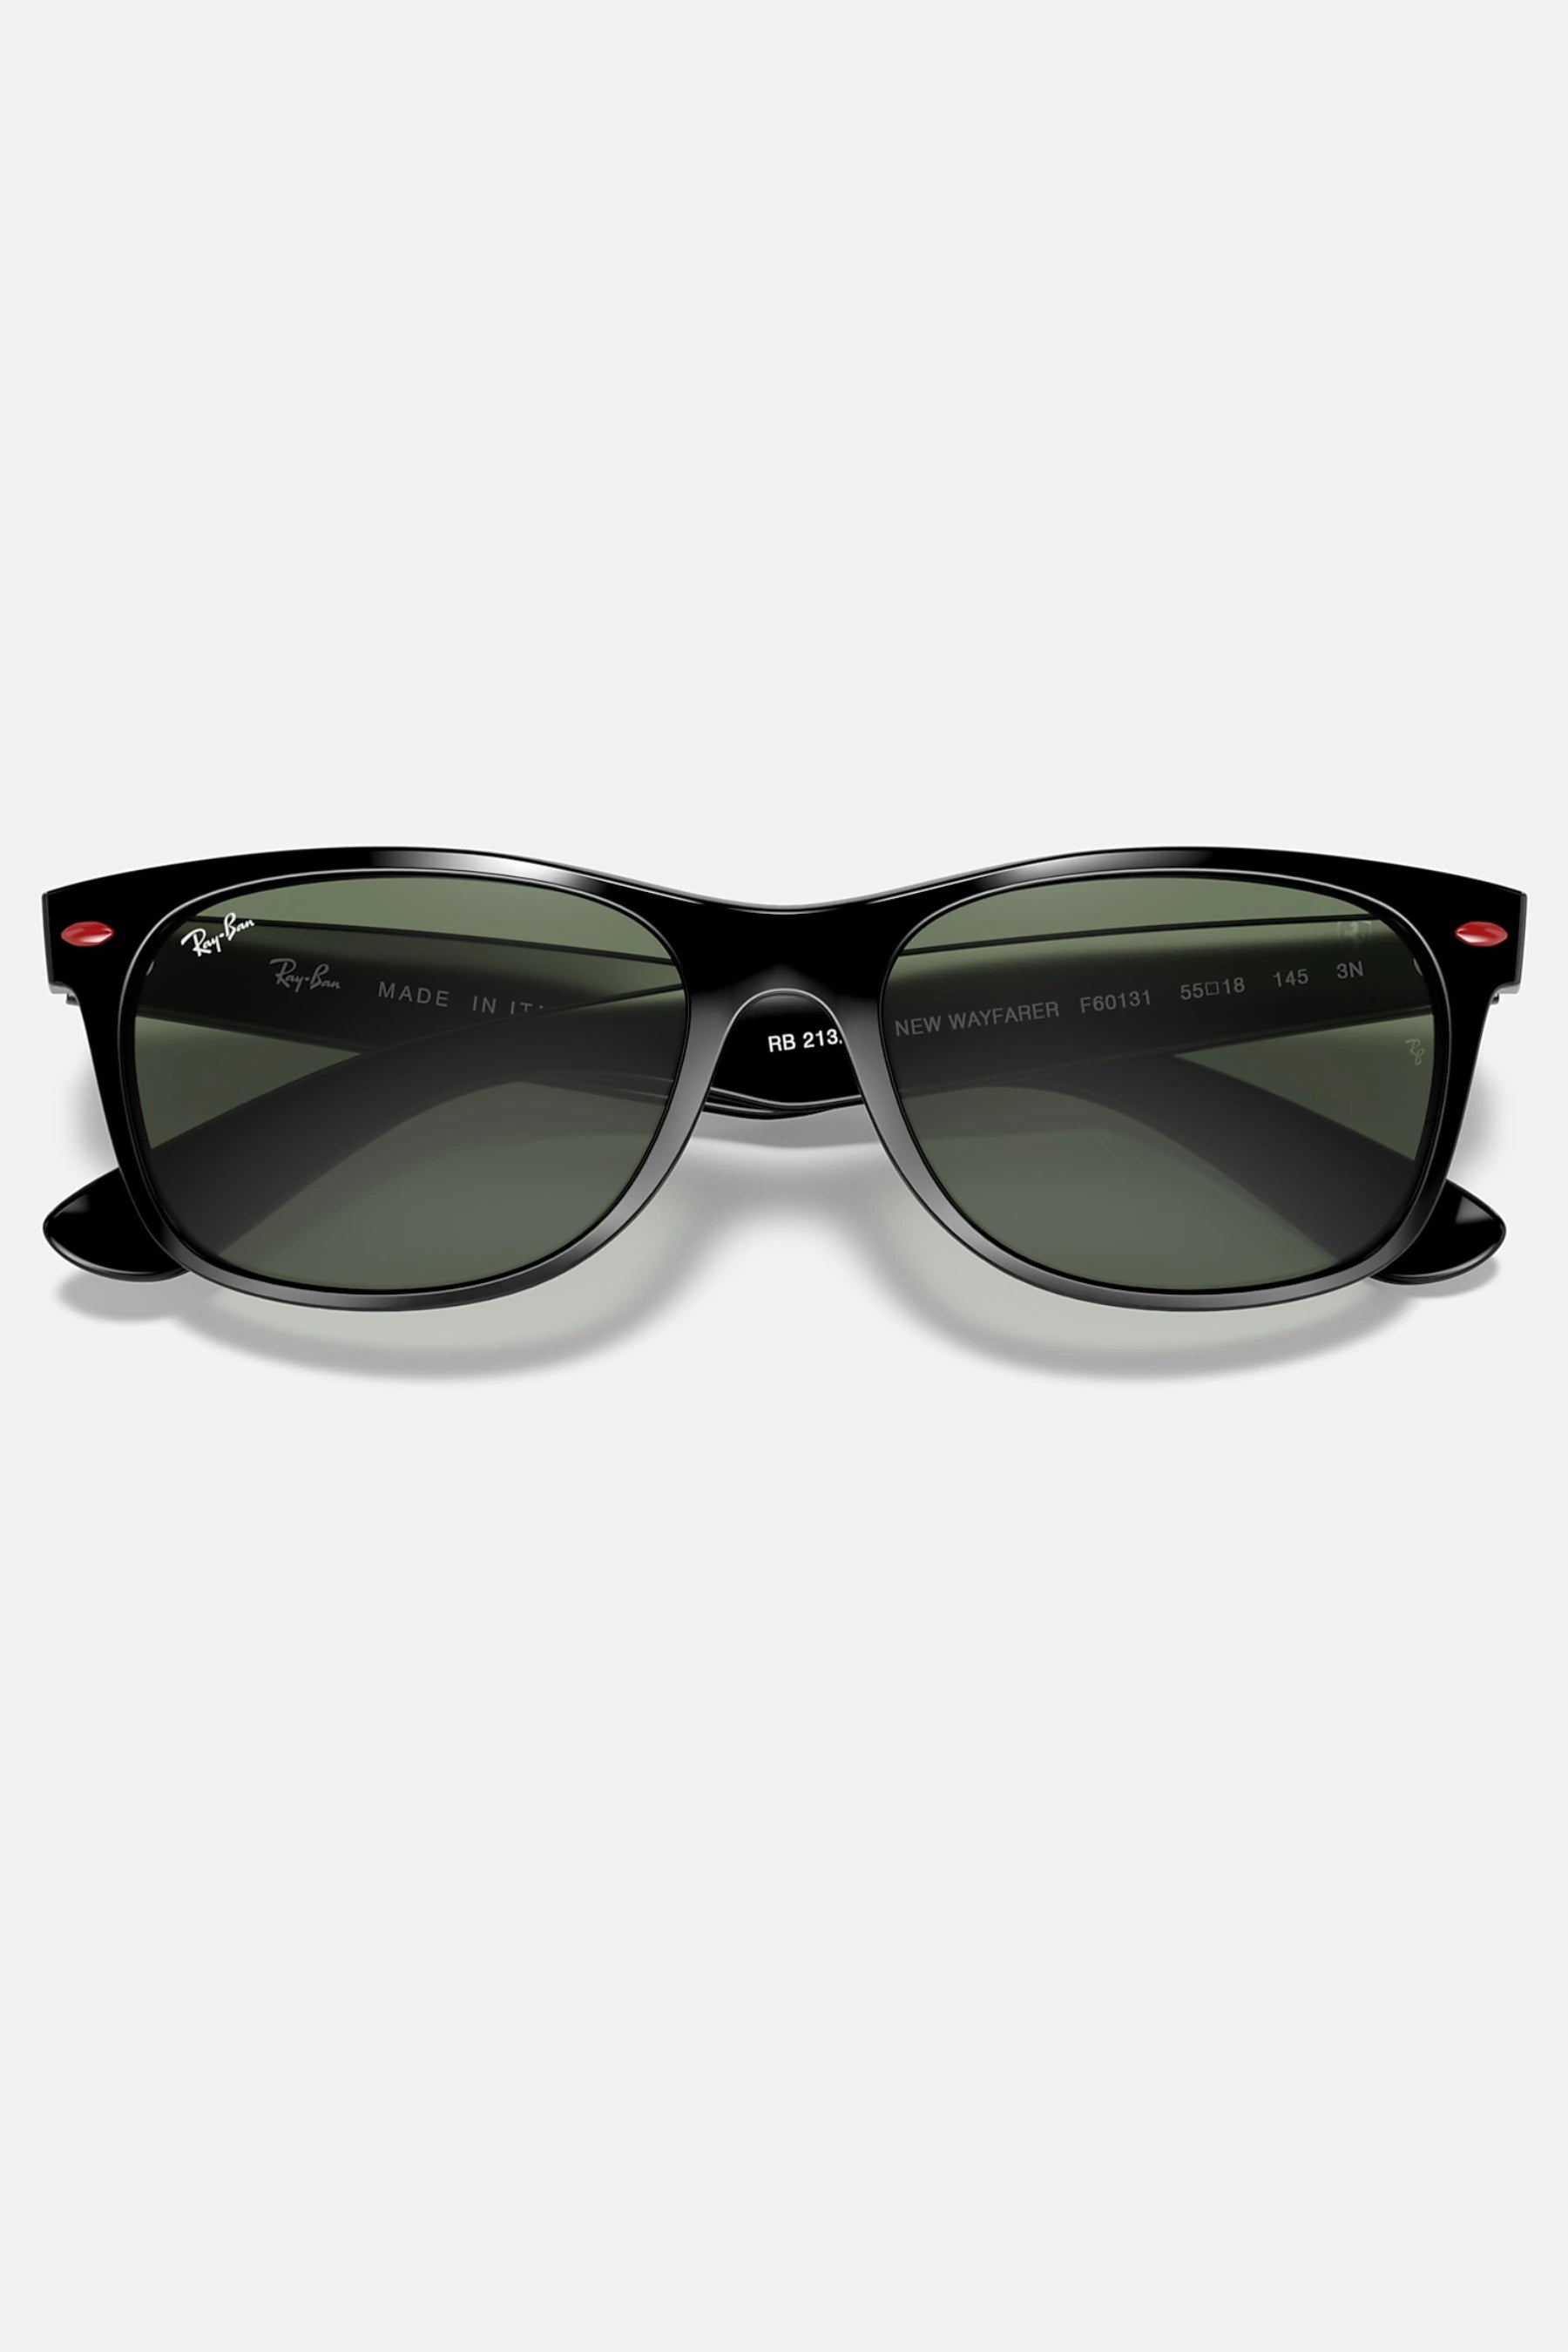 Ray-Ban RB2132M F60131 55-18